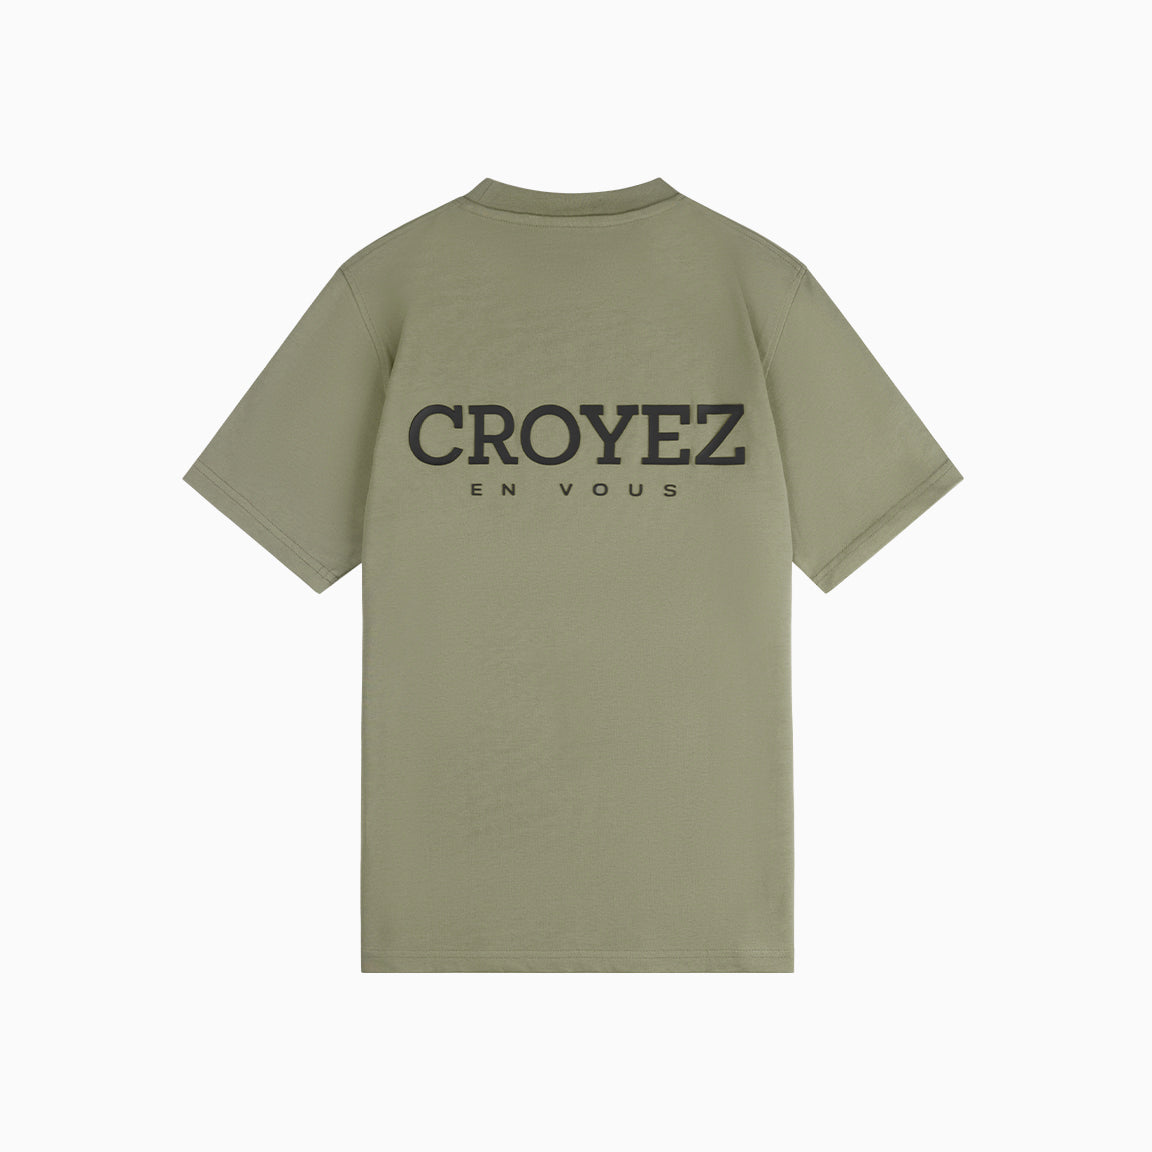 CROYEZ ABSTRACT T-SHIRT - LIGHT ARMY